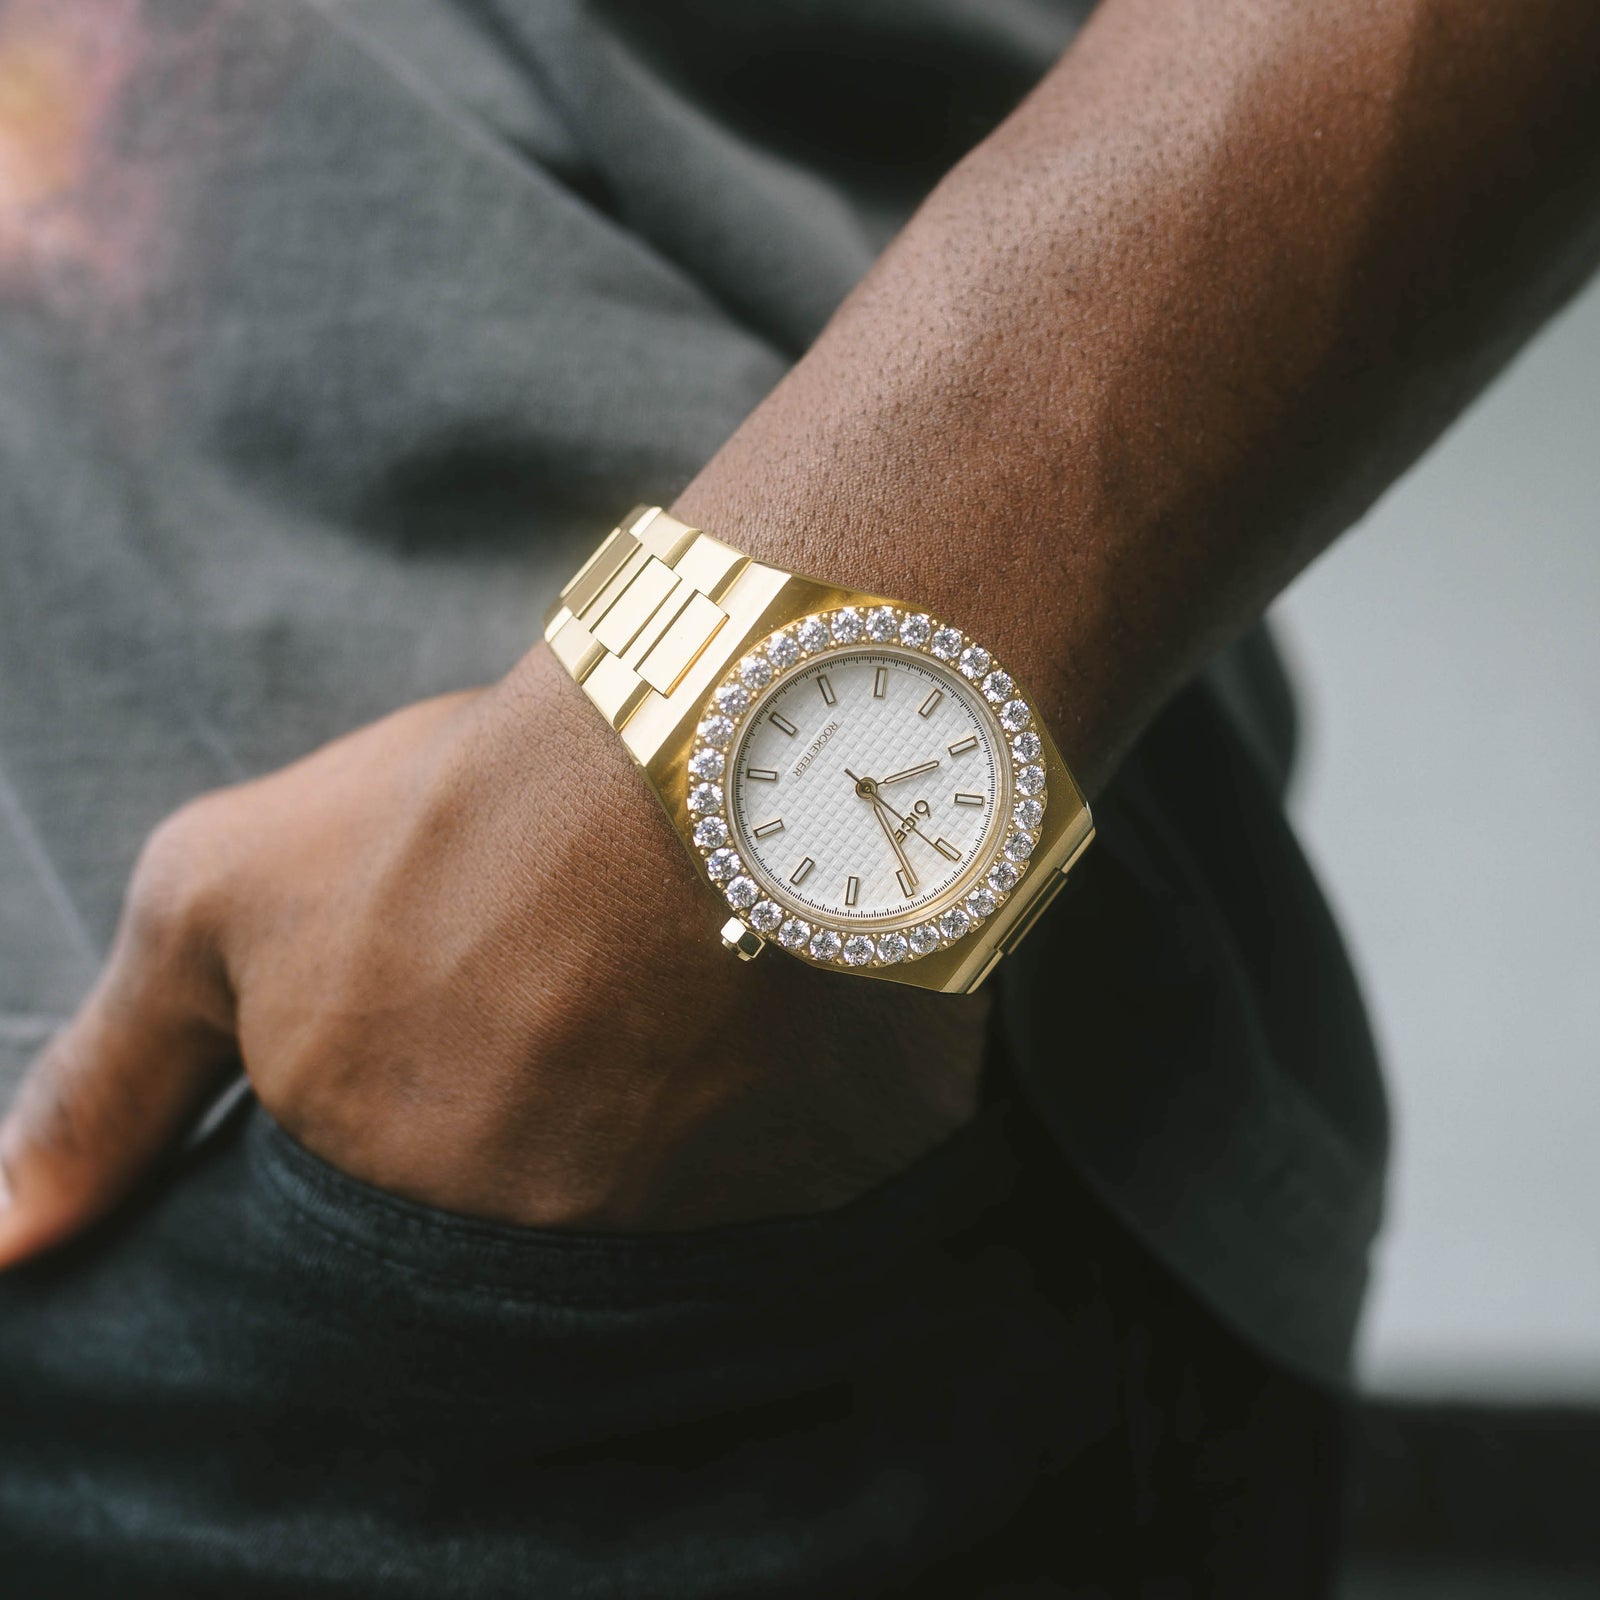 $49 Iced out Watches from iceshopjewelry.com 🤯 *Better than ShopGLD??📲 